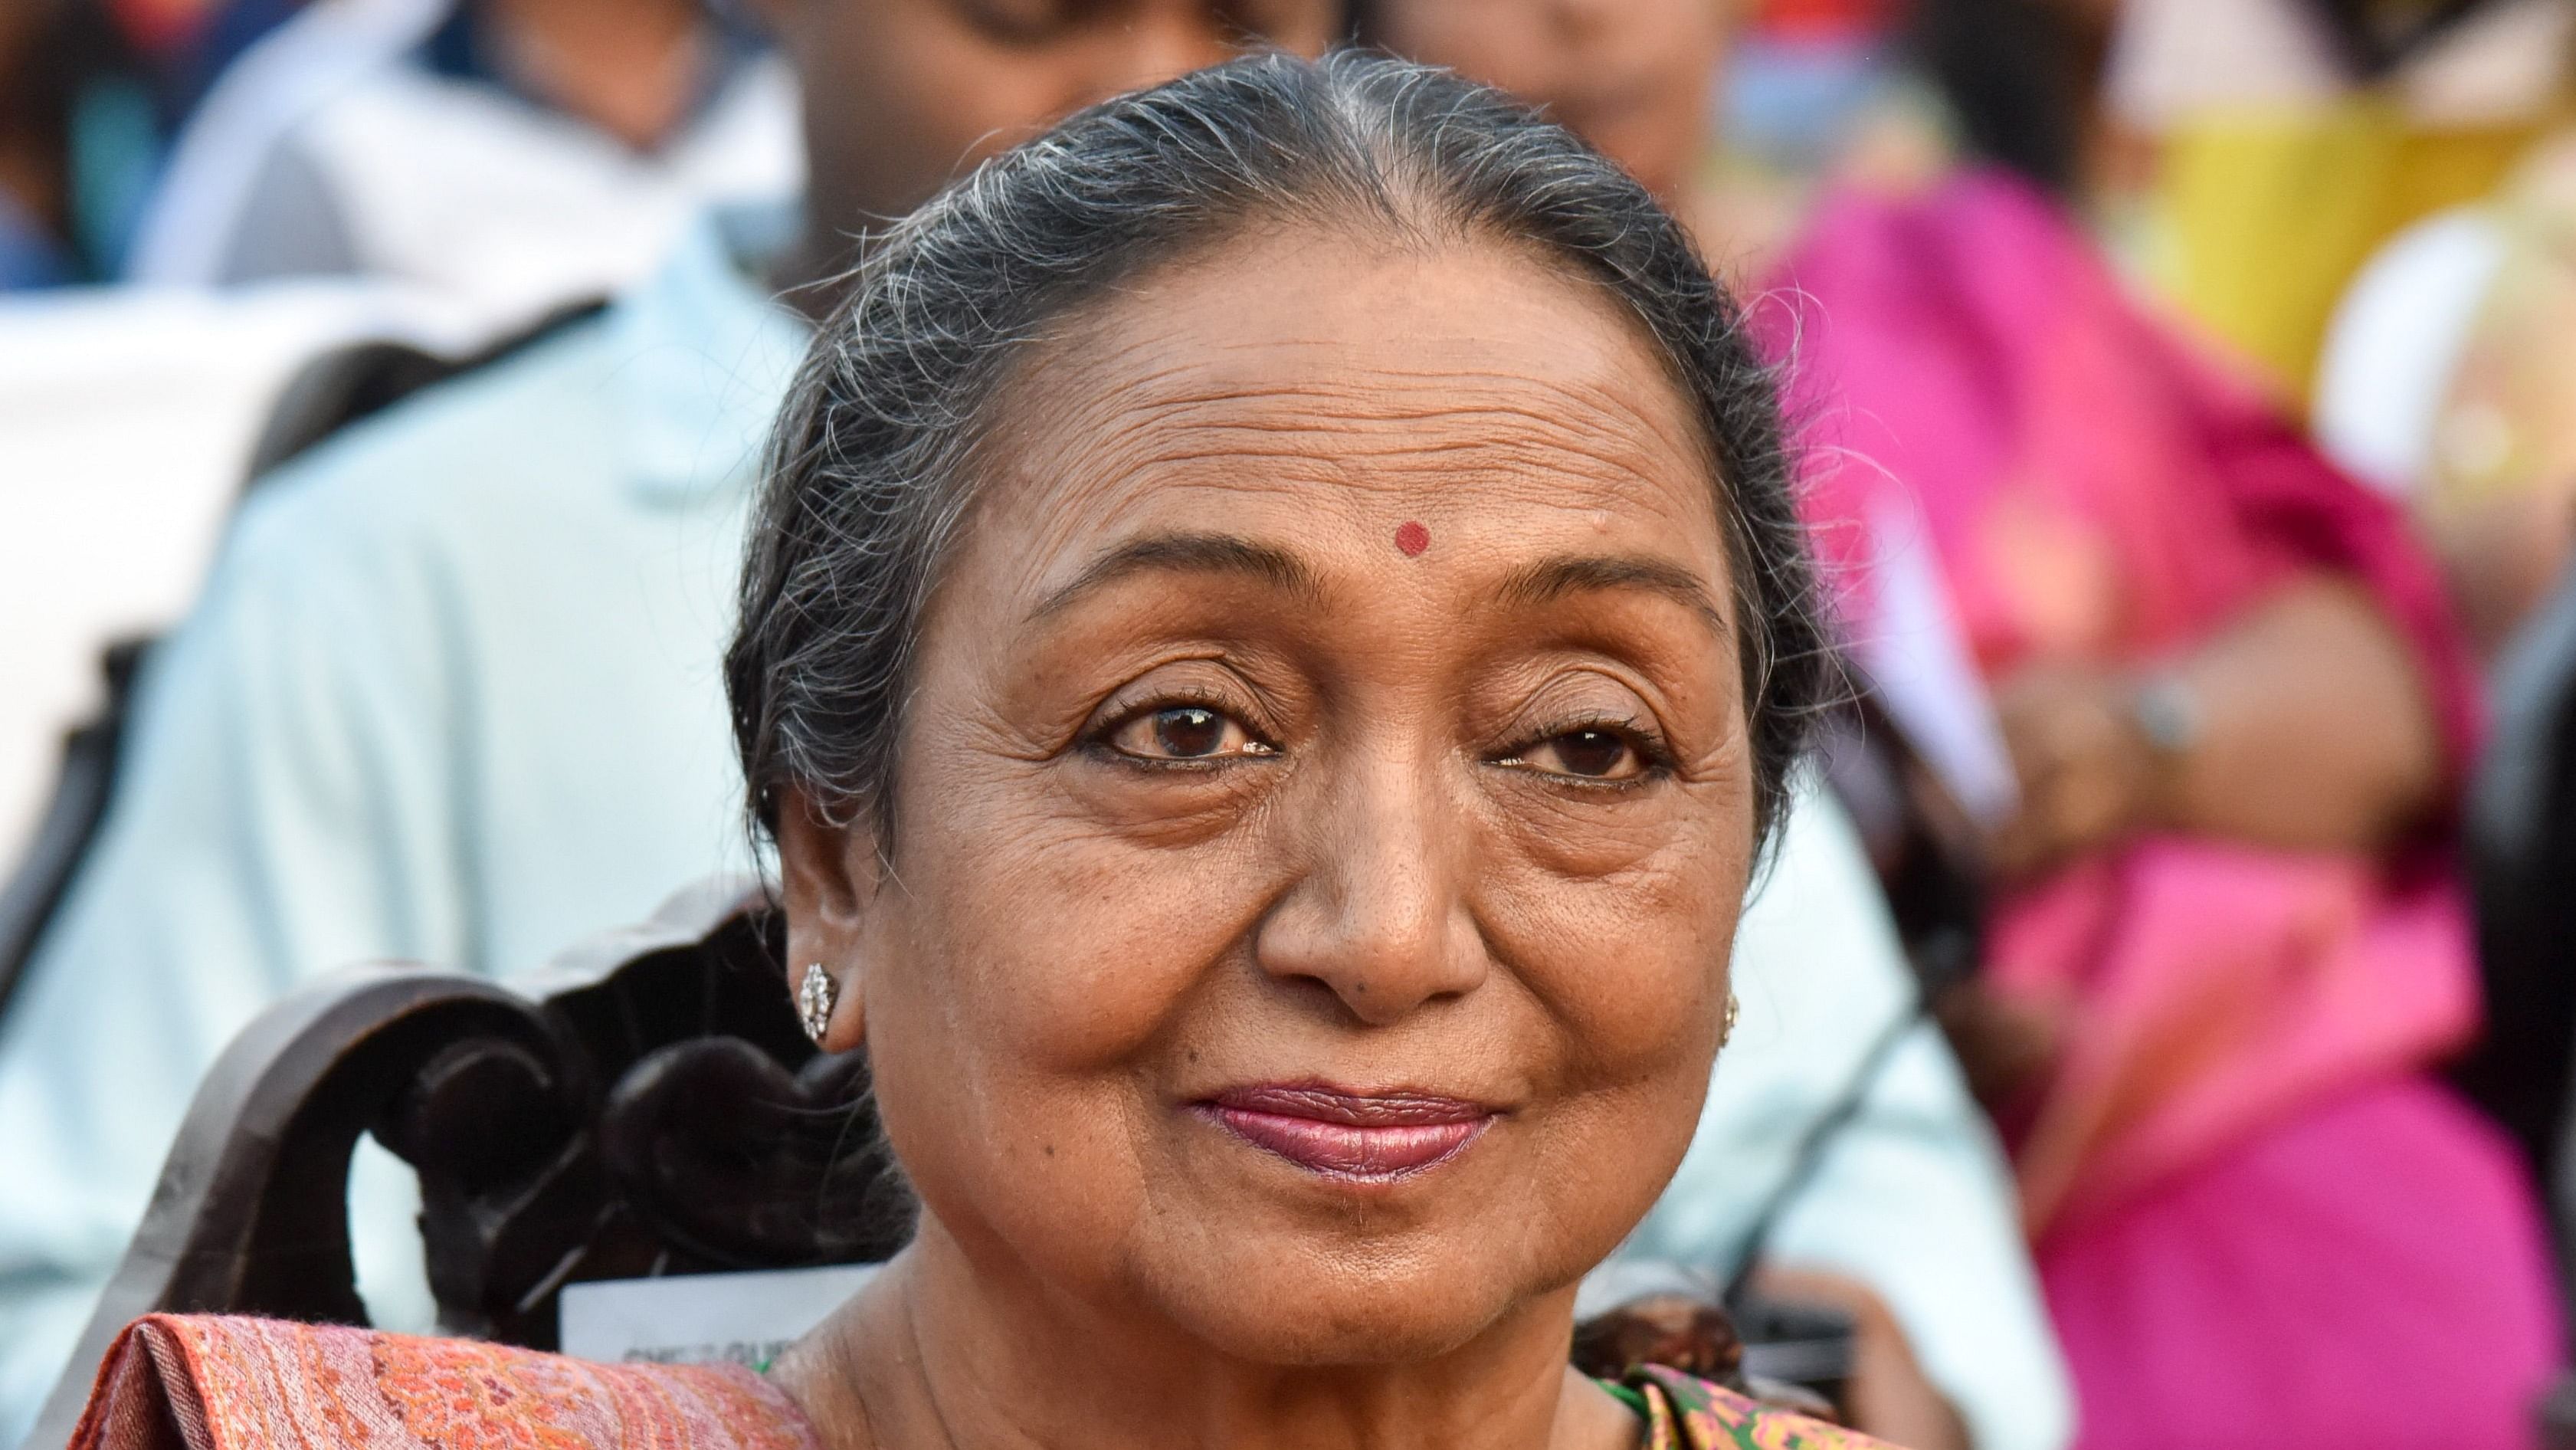 Senior Congress leader Meira Kumar on Sunday stressed on completely eradicating the "illness" of caste system and adopting a "zero tolerance" approach against prejudice. Credit: DH File Photo